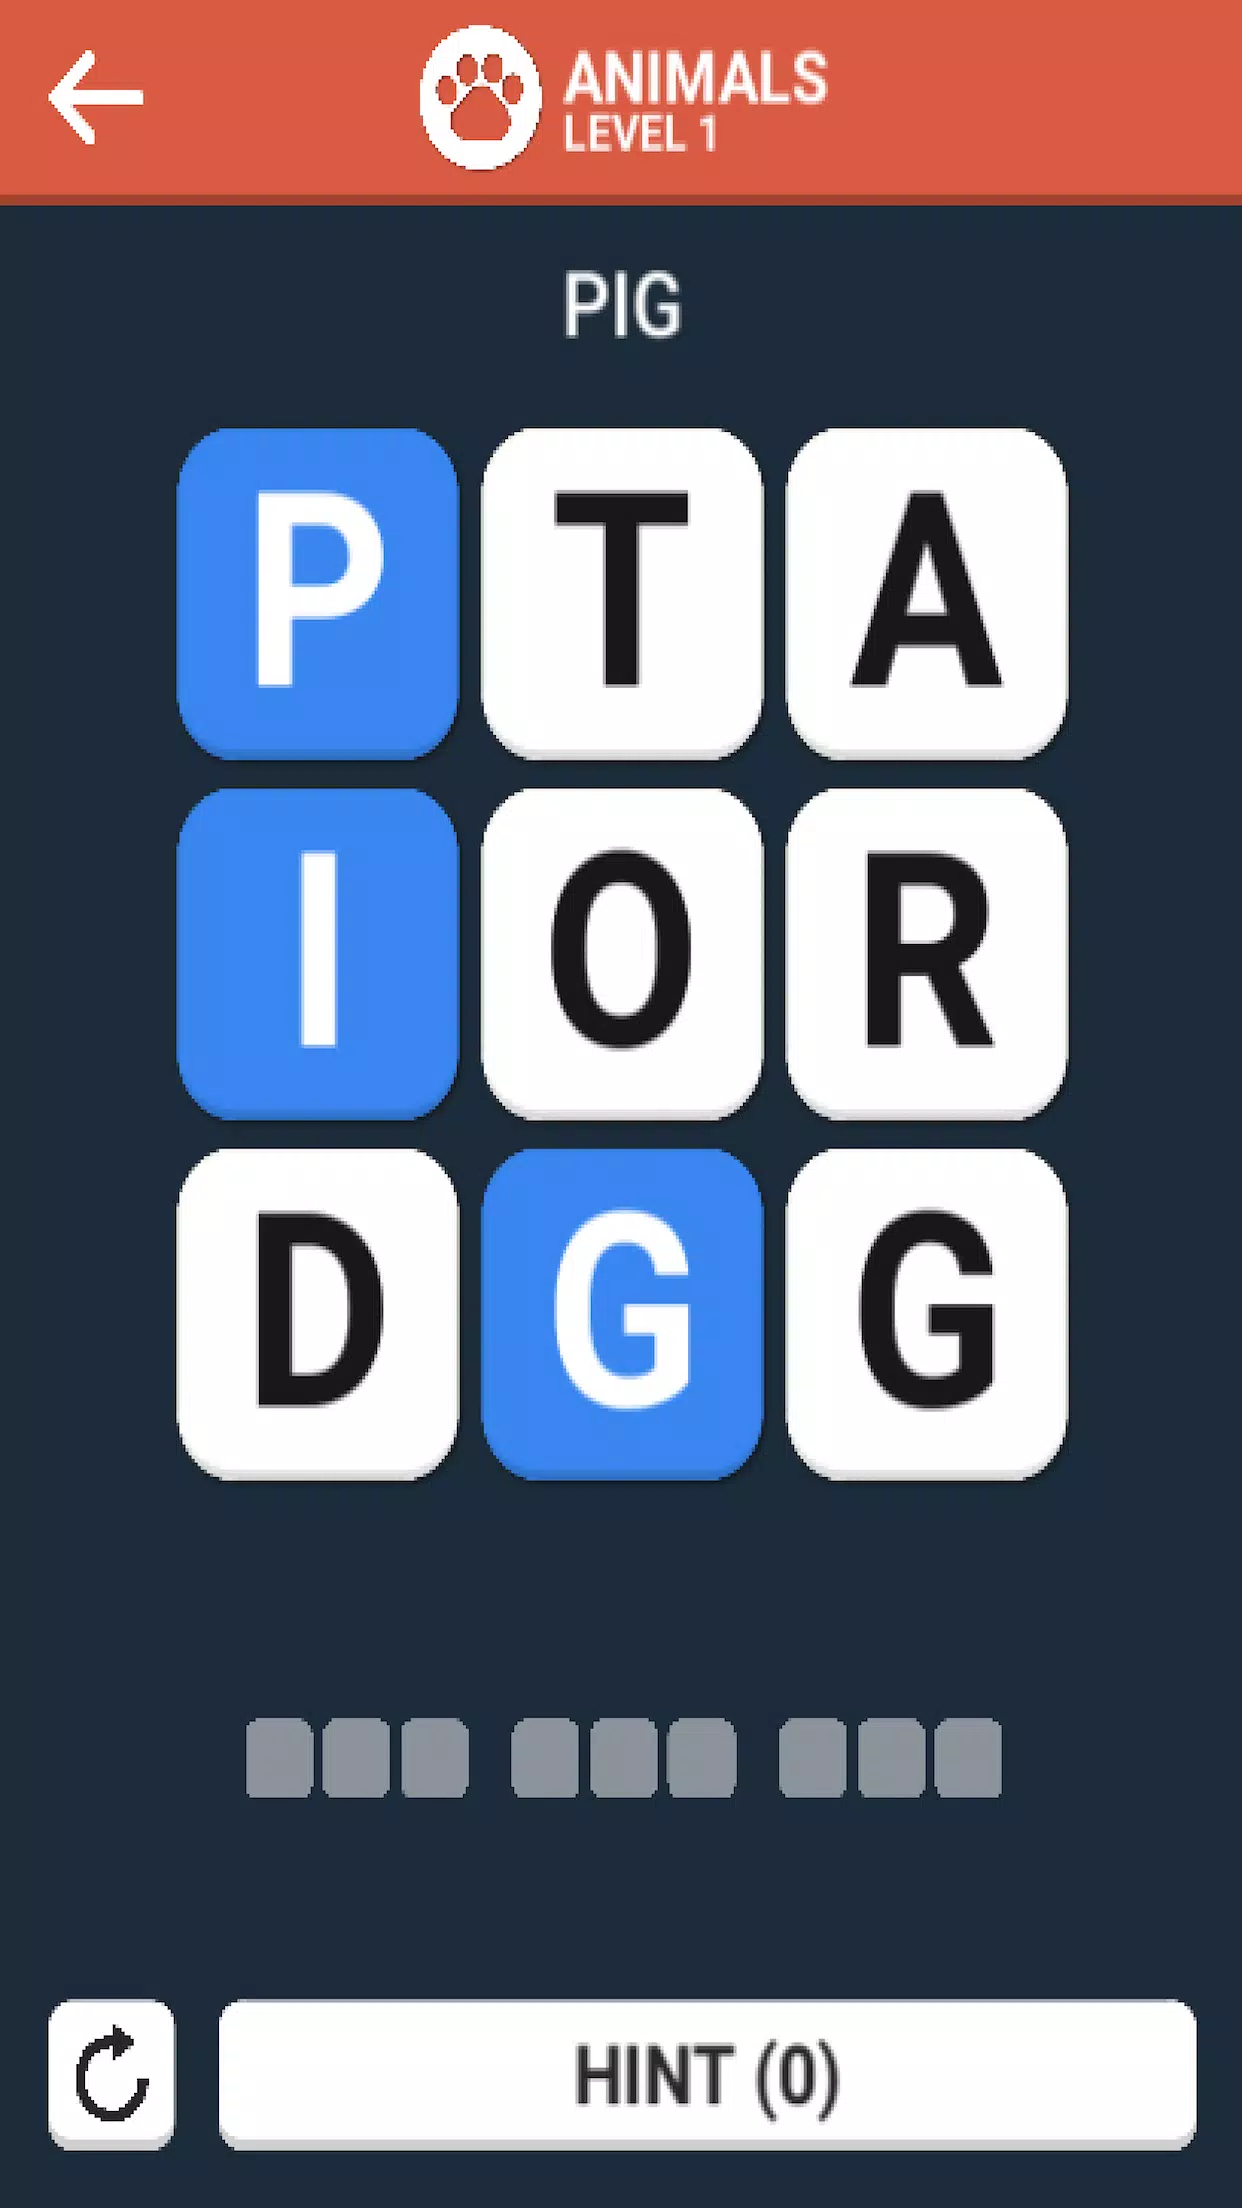 Word Collect - Free Word Games for Android - Download